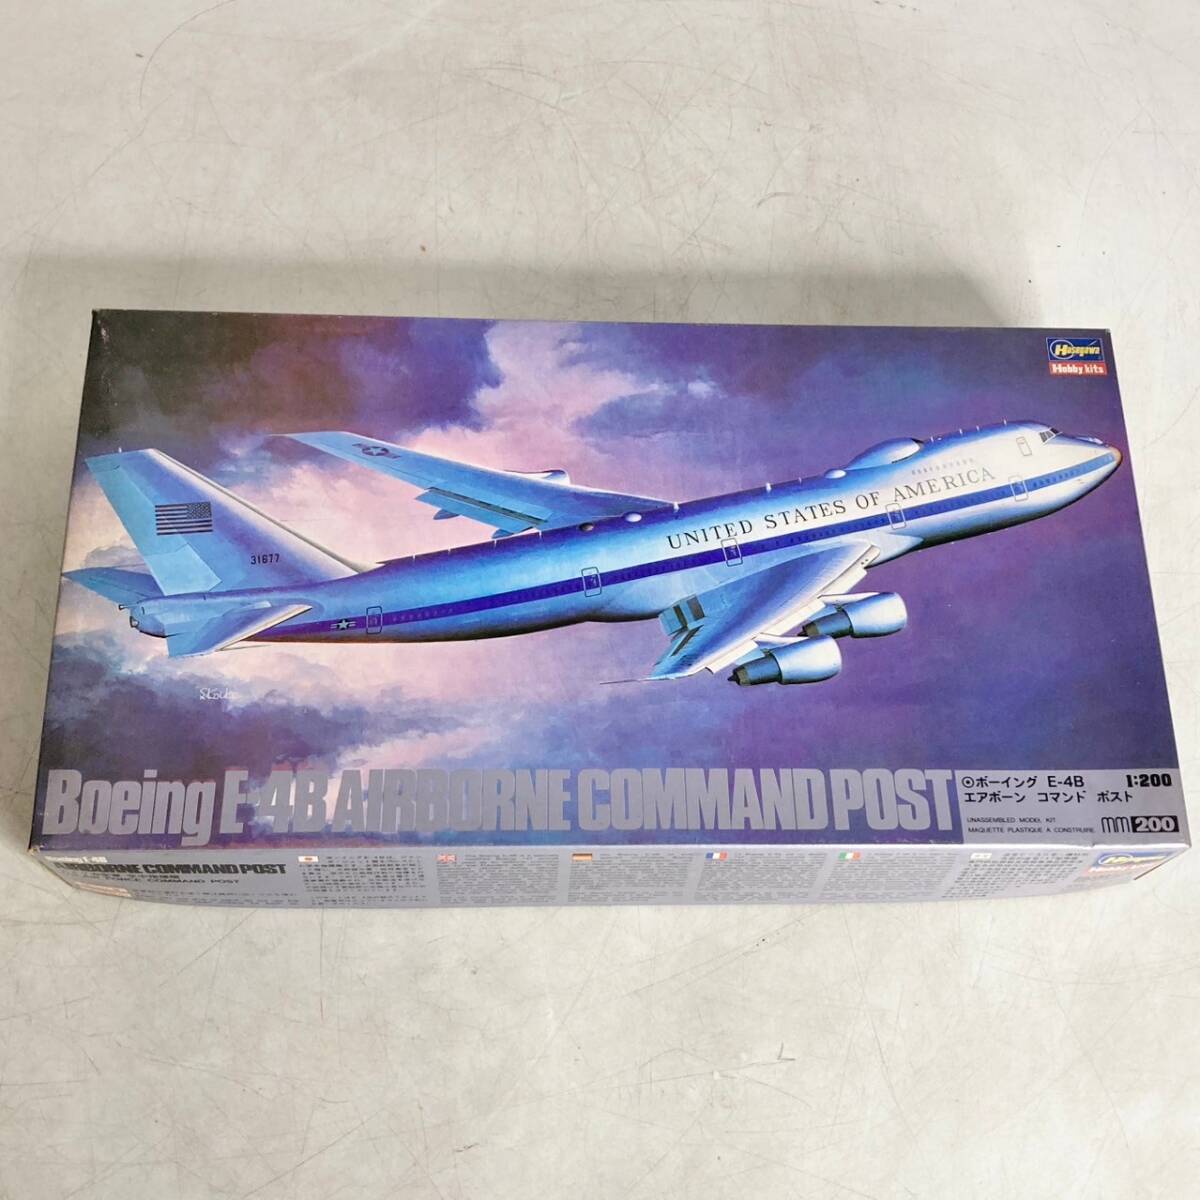  not yet constructed present condition goods plastic model Hasegawa Hasegawa Boeing E-4B AIRBORNE COMMAND POSTbo- wing Airborne commando post 1/200